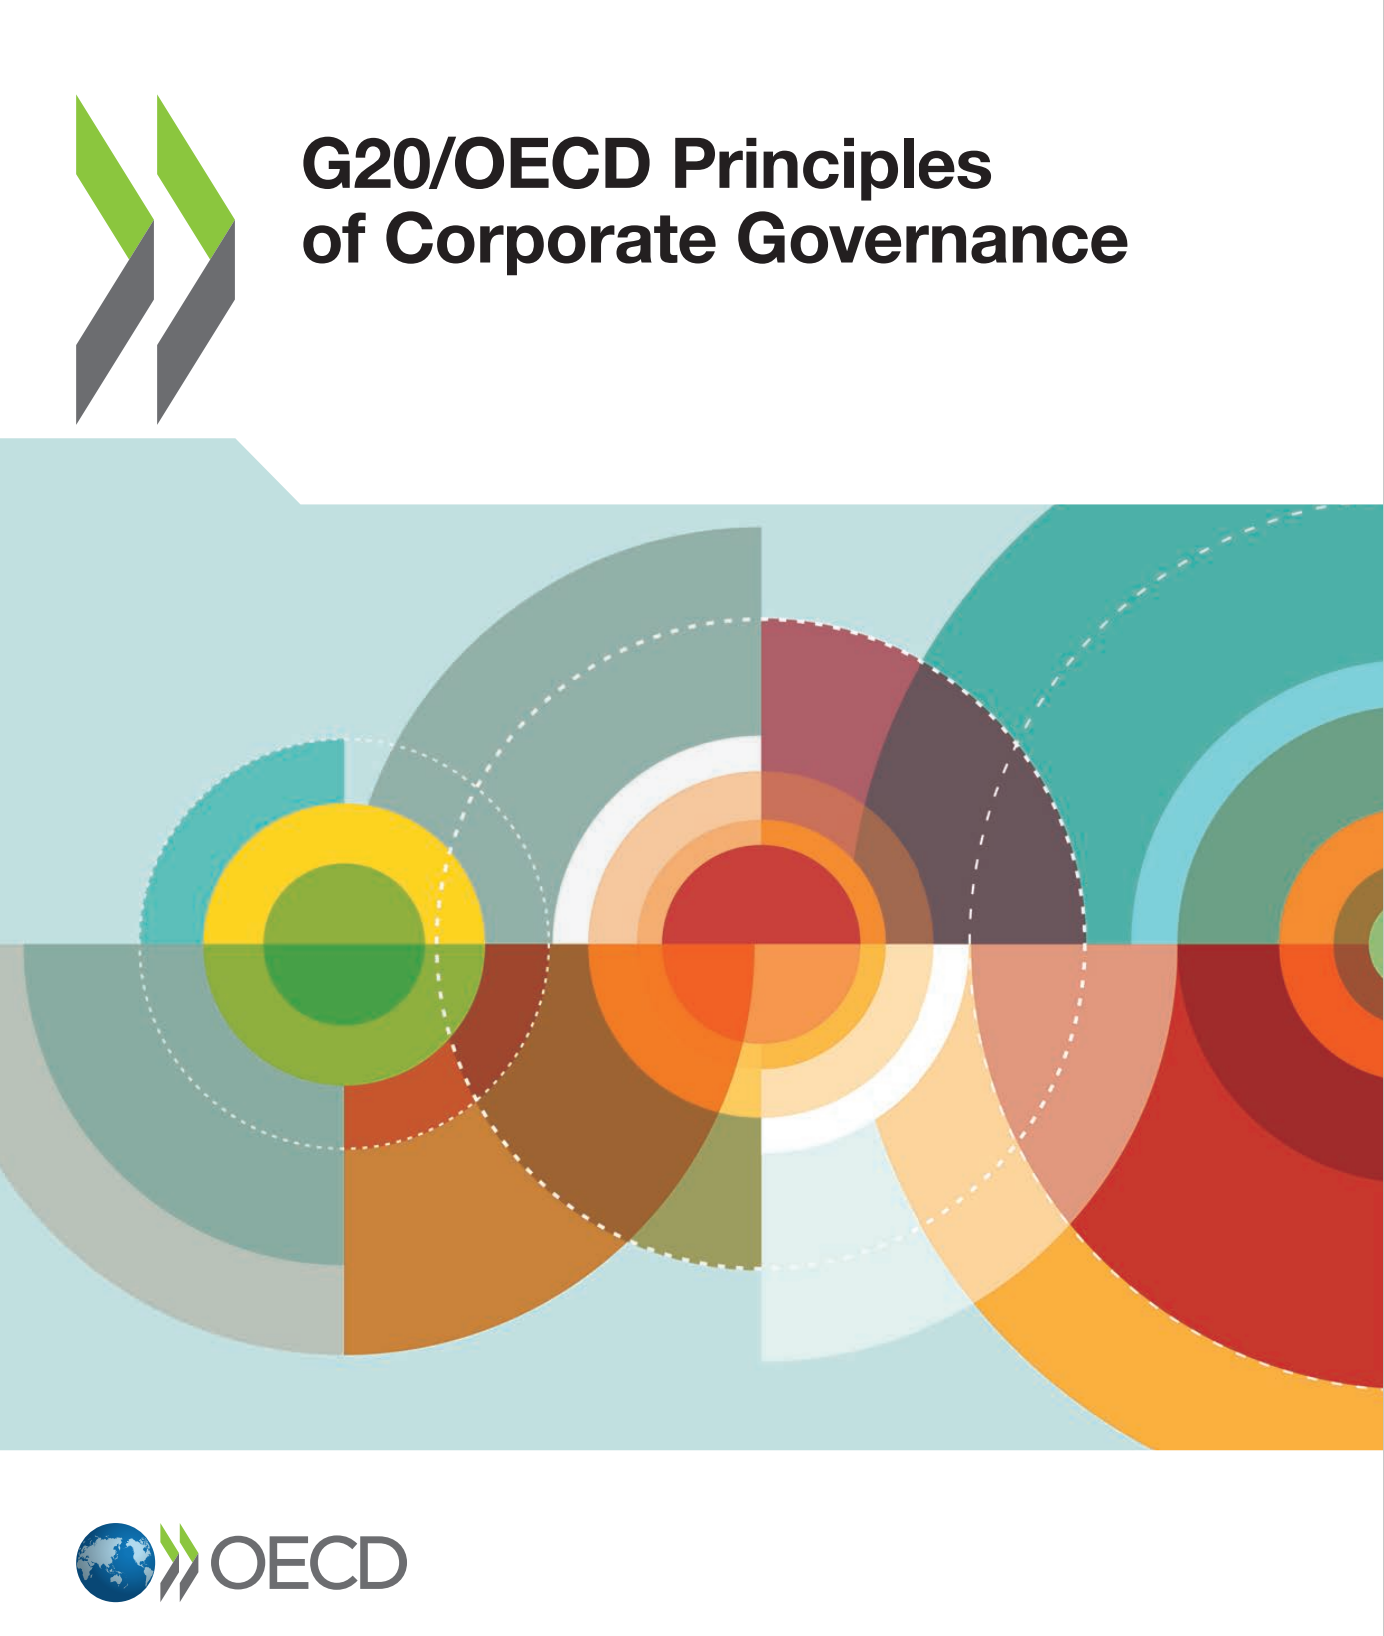 G20/OECD Principles of Corporate Governance